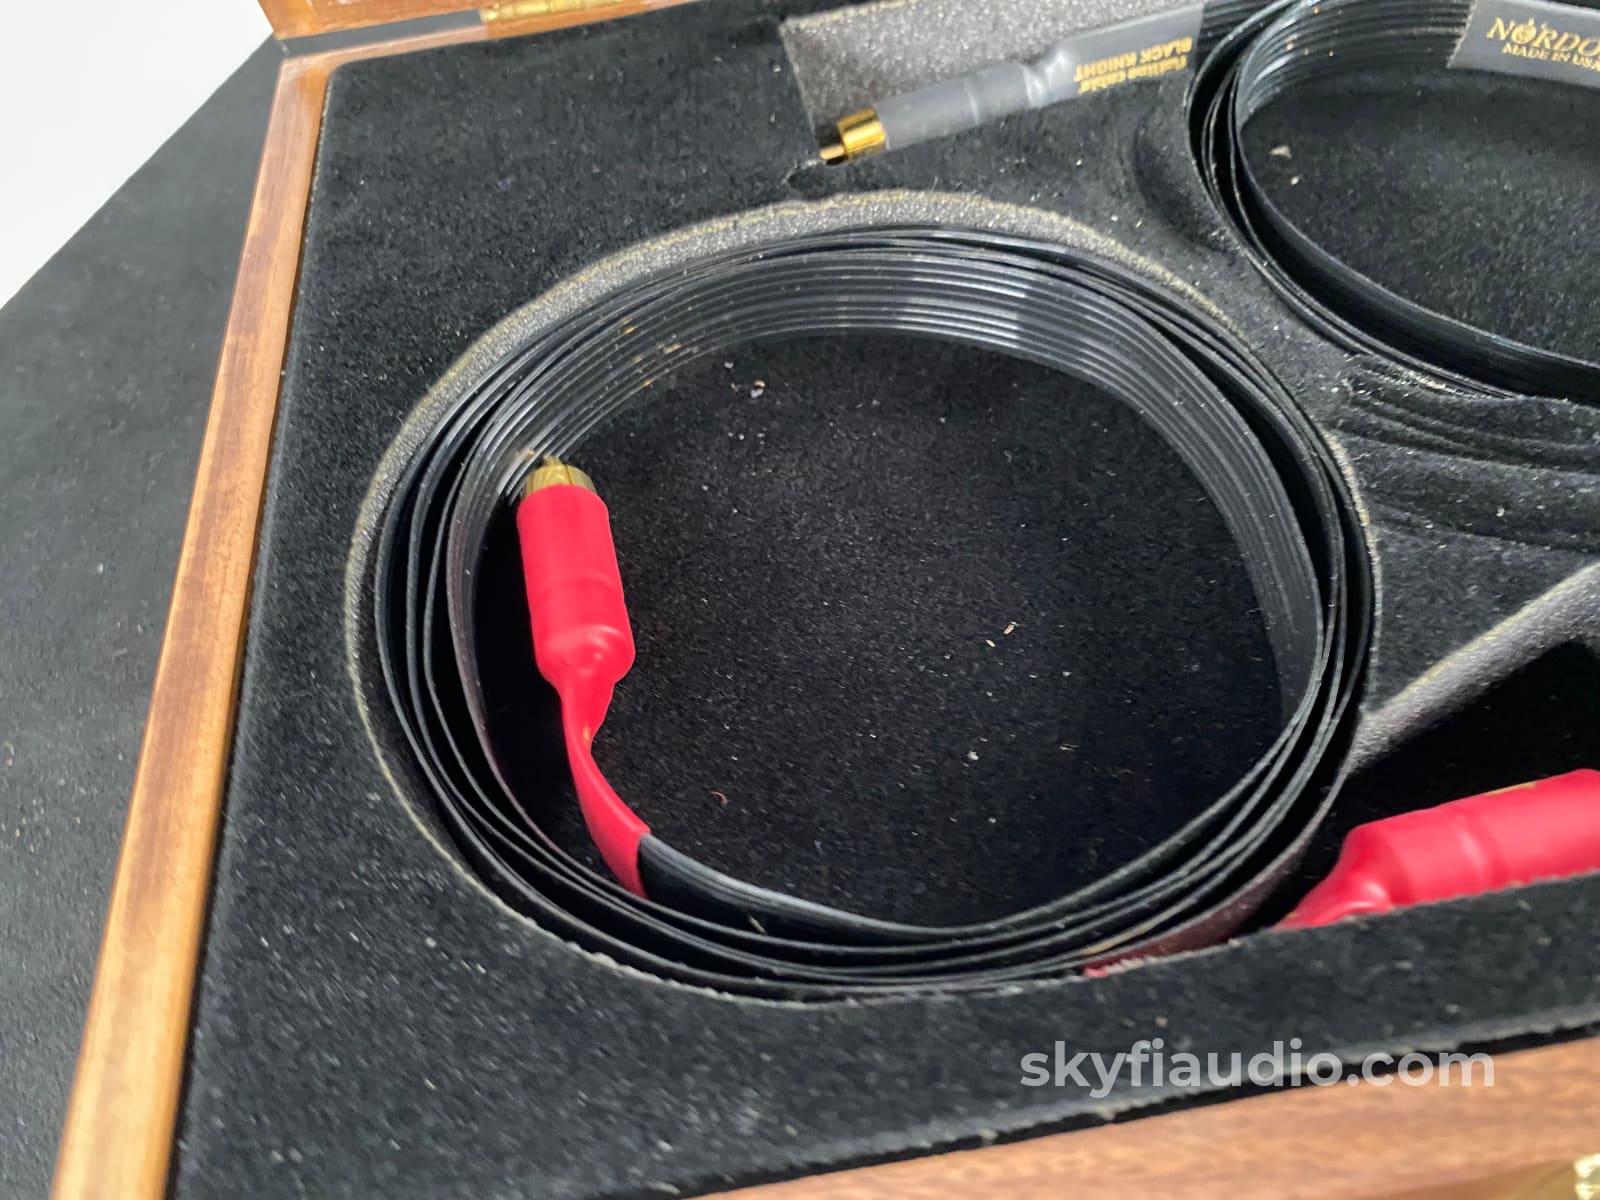 Nordost Black Knight Rca Interconnects With Wood Case - 2M Cables